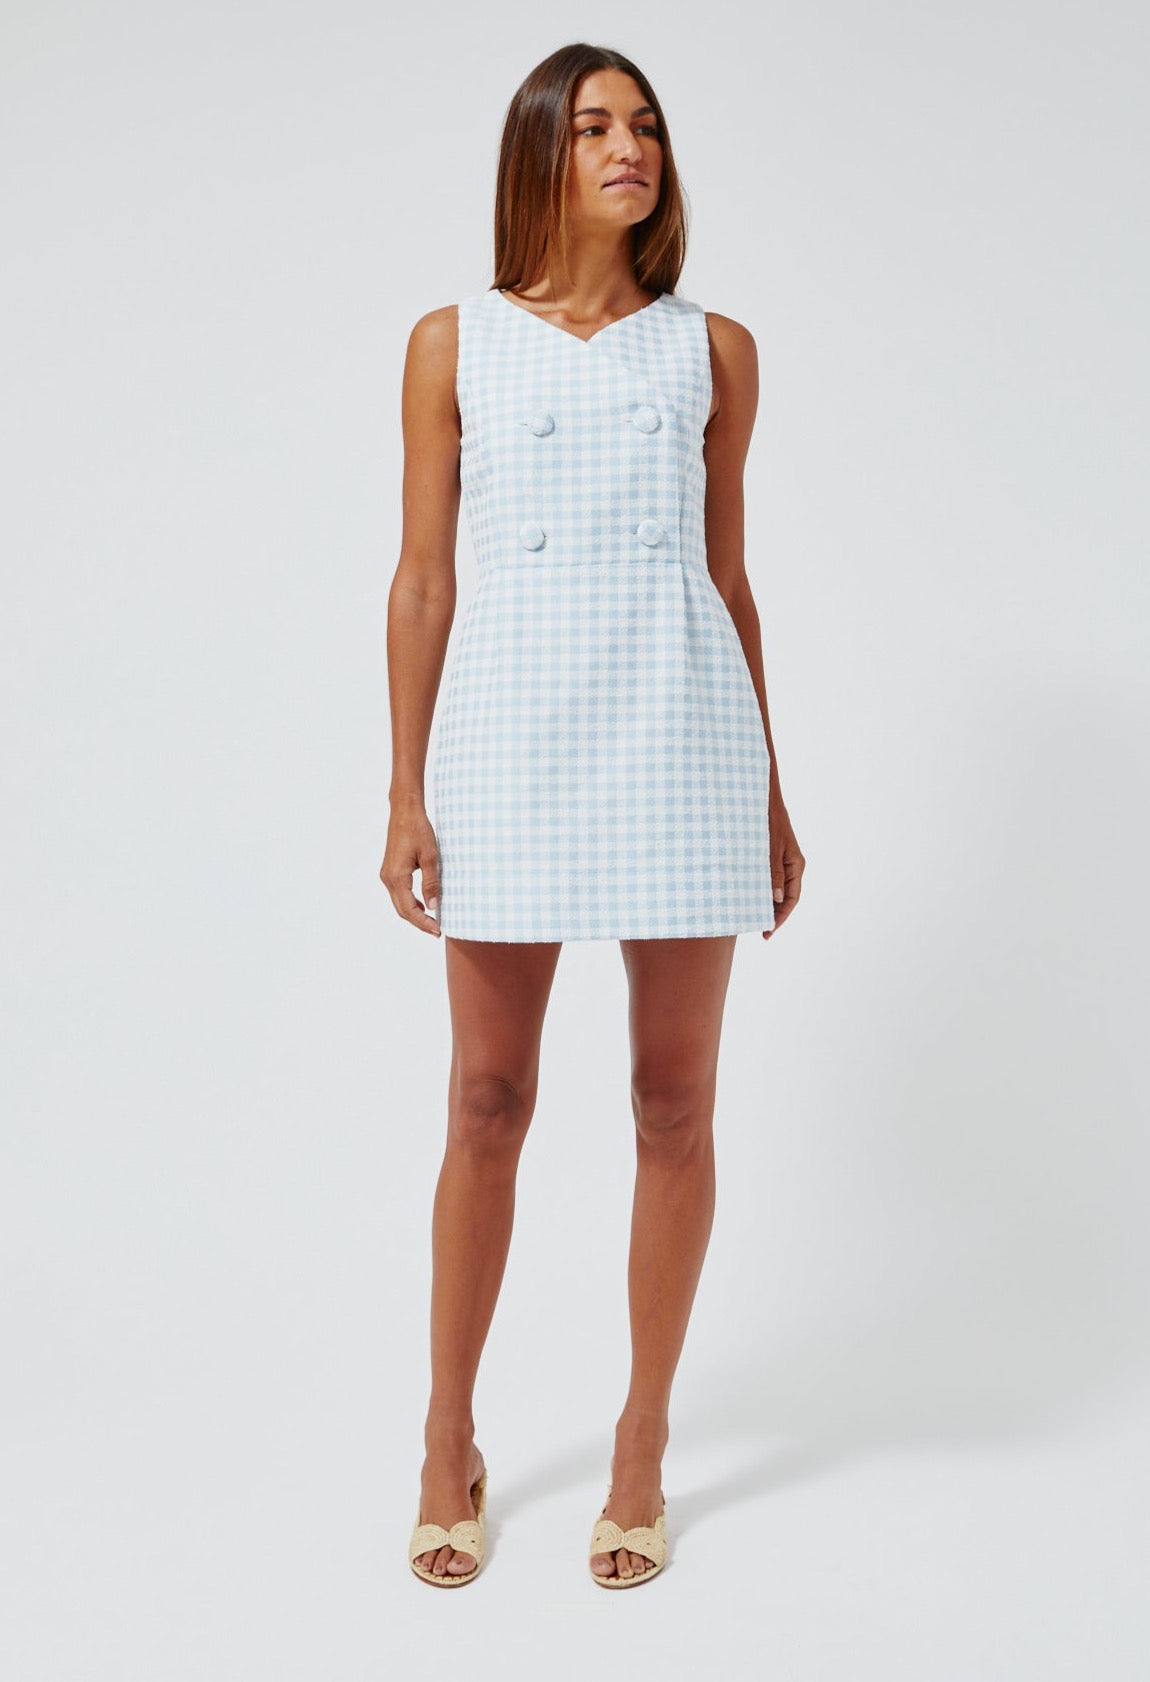 THE JACKIE MINI DRESS in VINTAGE BLUE GINGHAM BOUCLE